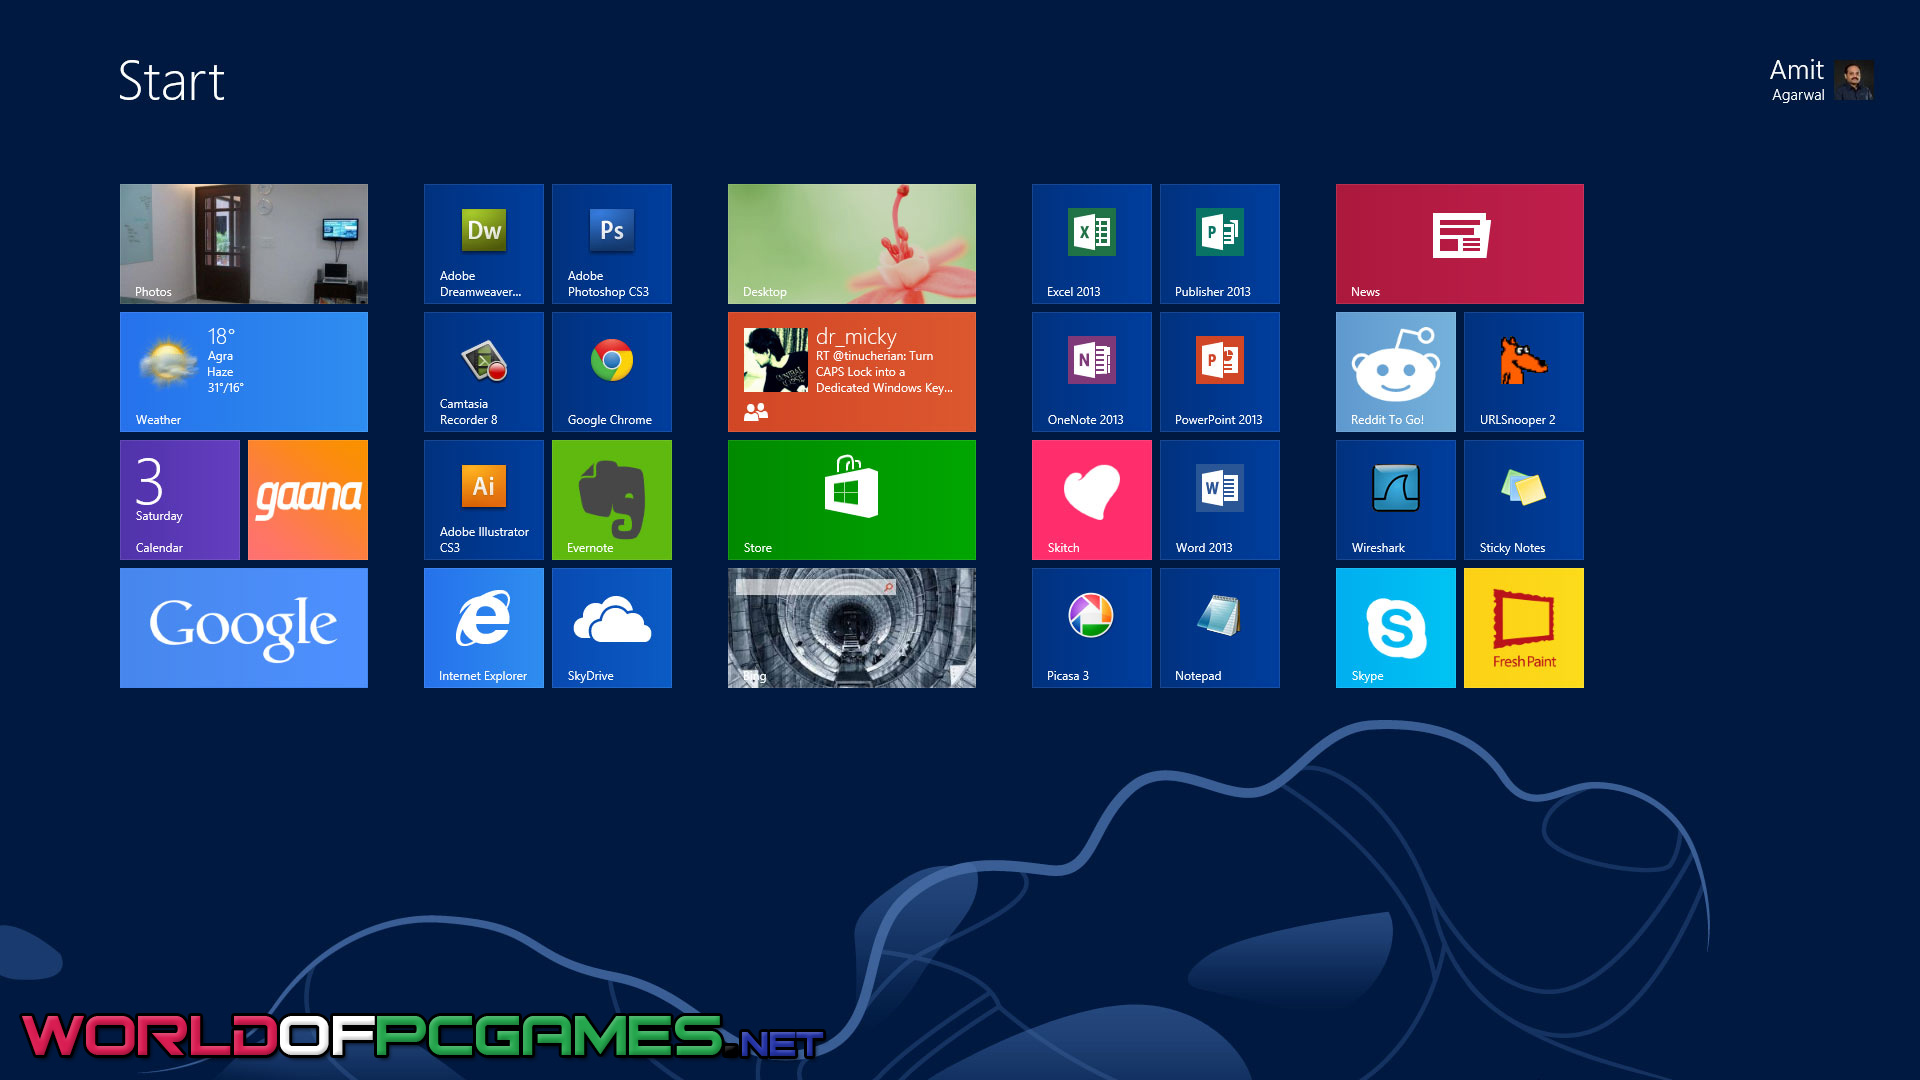 Windows 8 Activator Free Download By worldof-pcgames.net